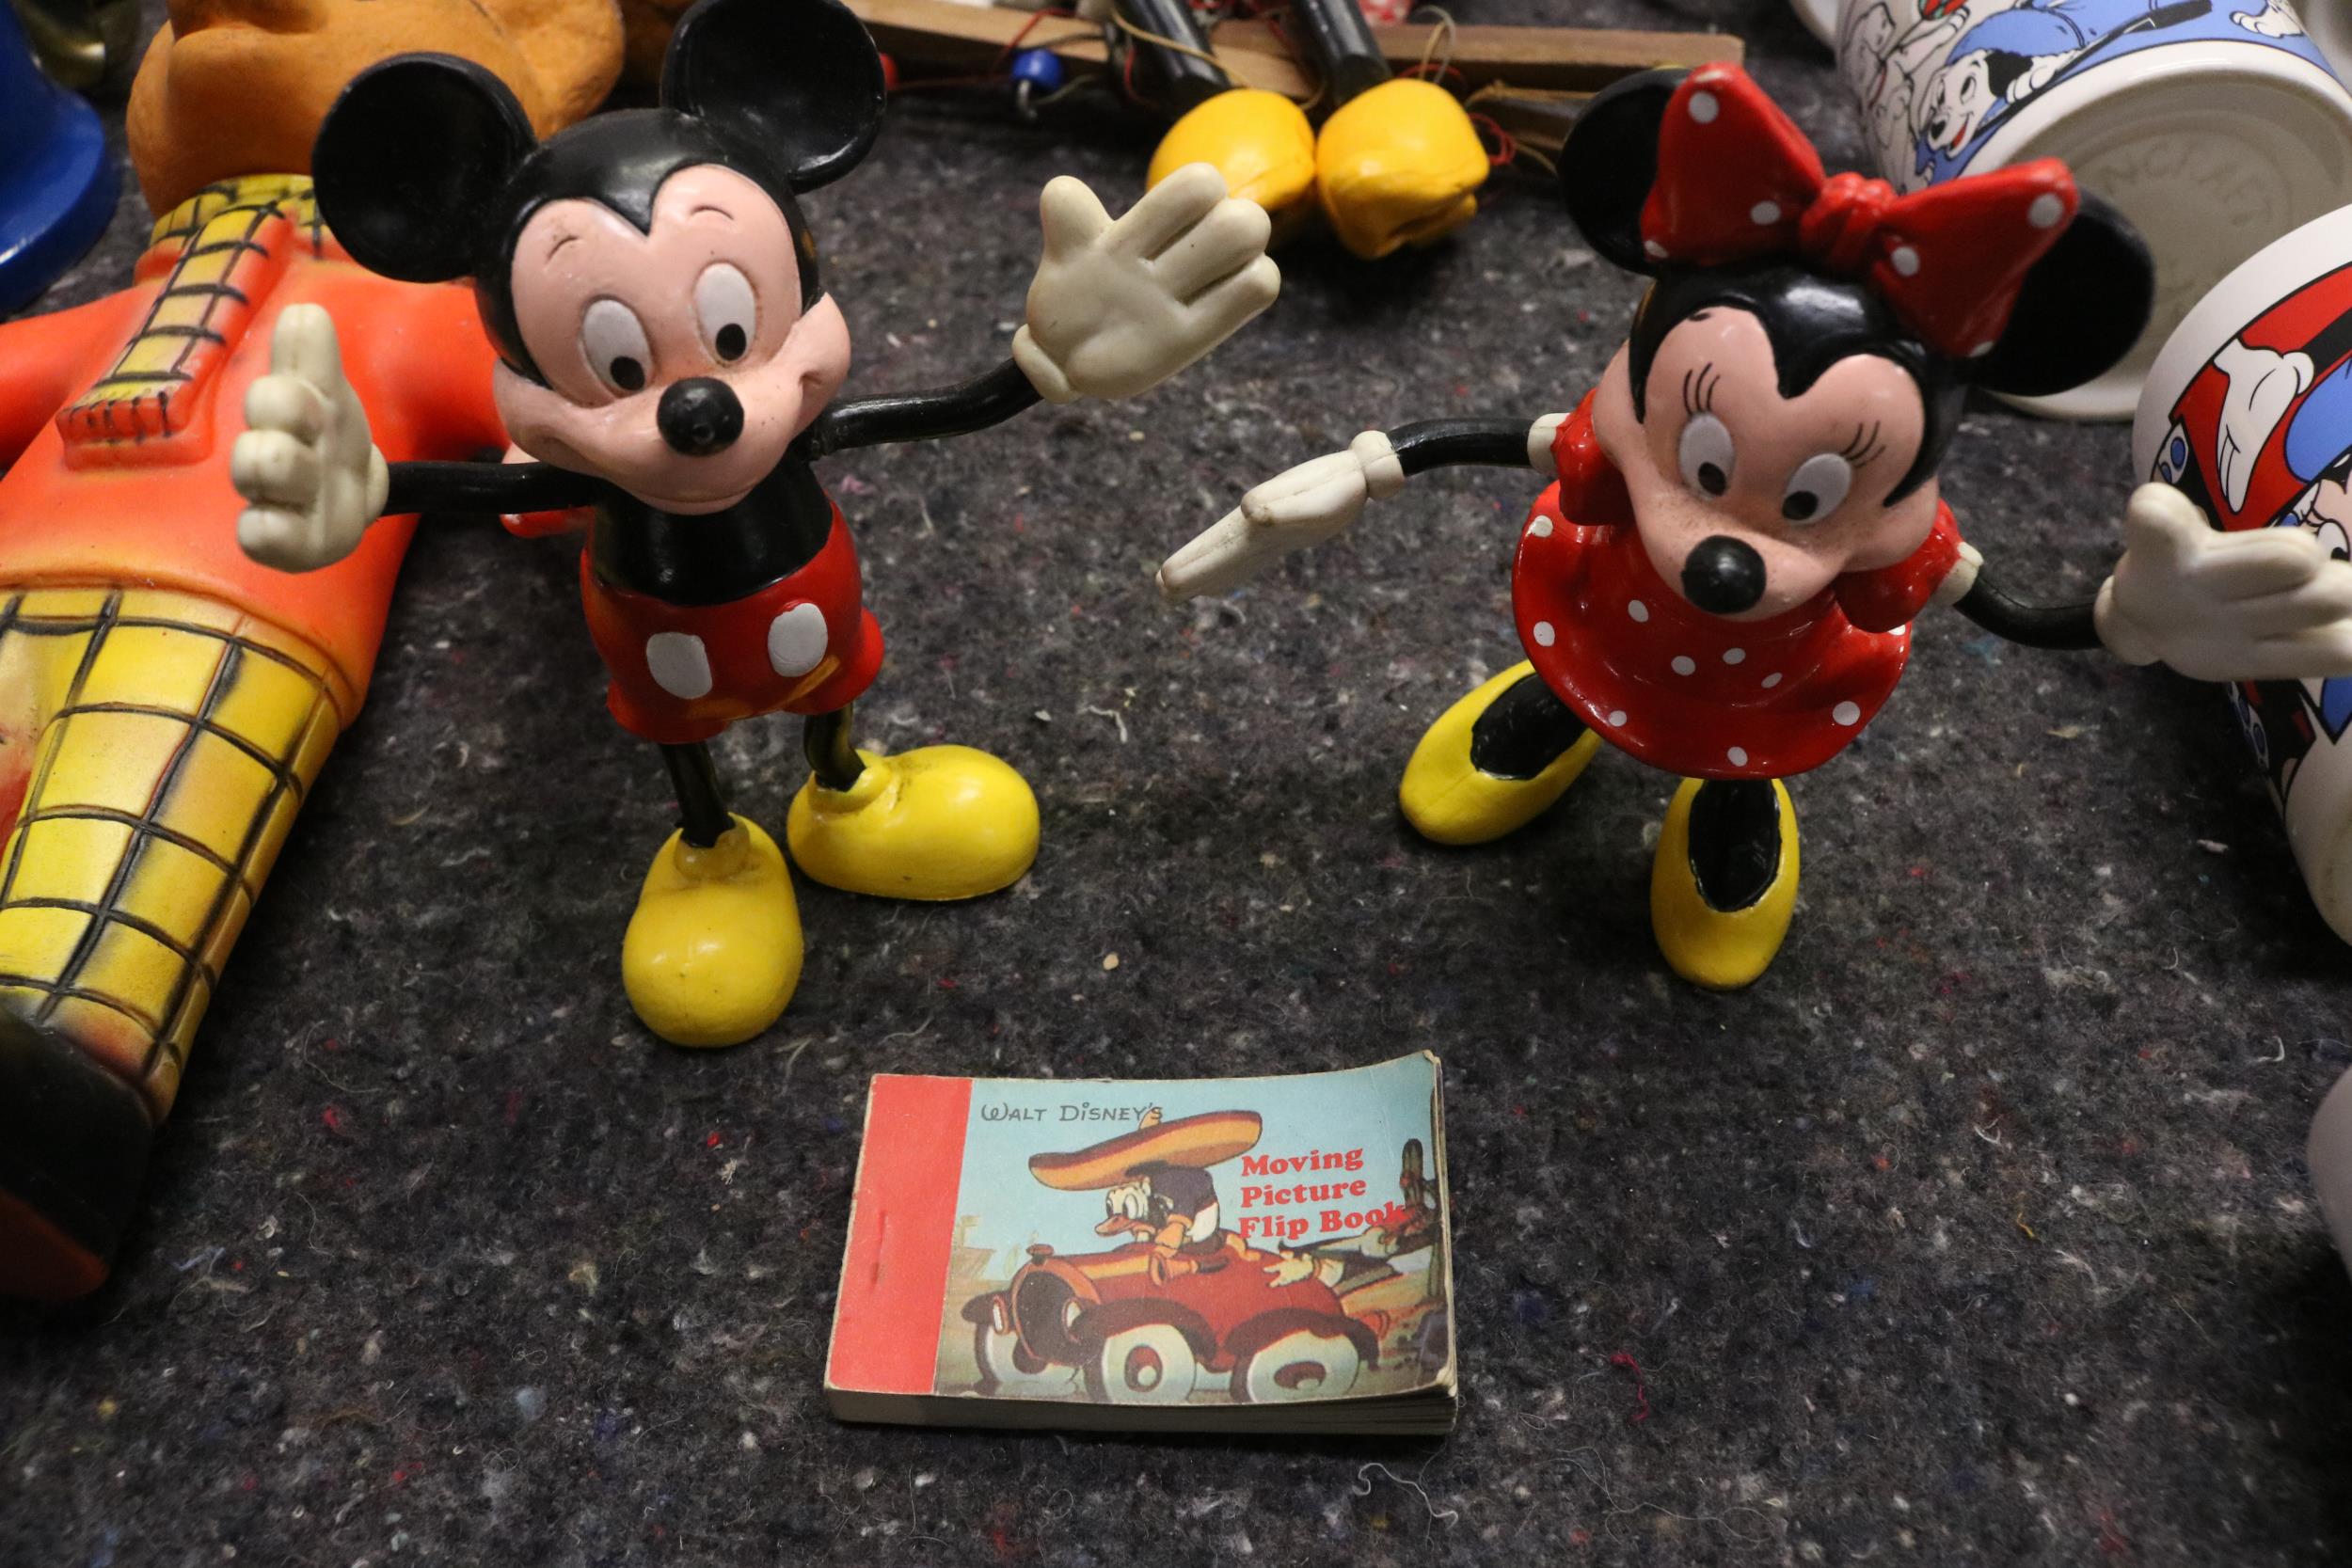 Large Collection Of Items Relating To Disney, Including 8 Vintage Alarm Clocks - Image 5 of 5